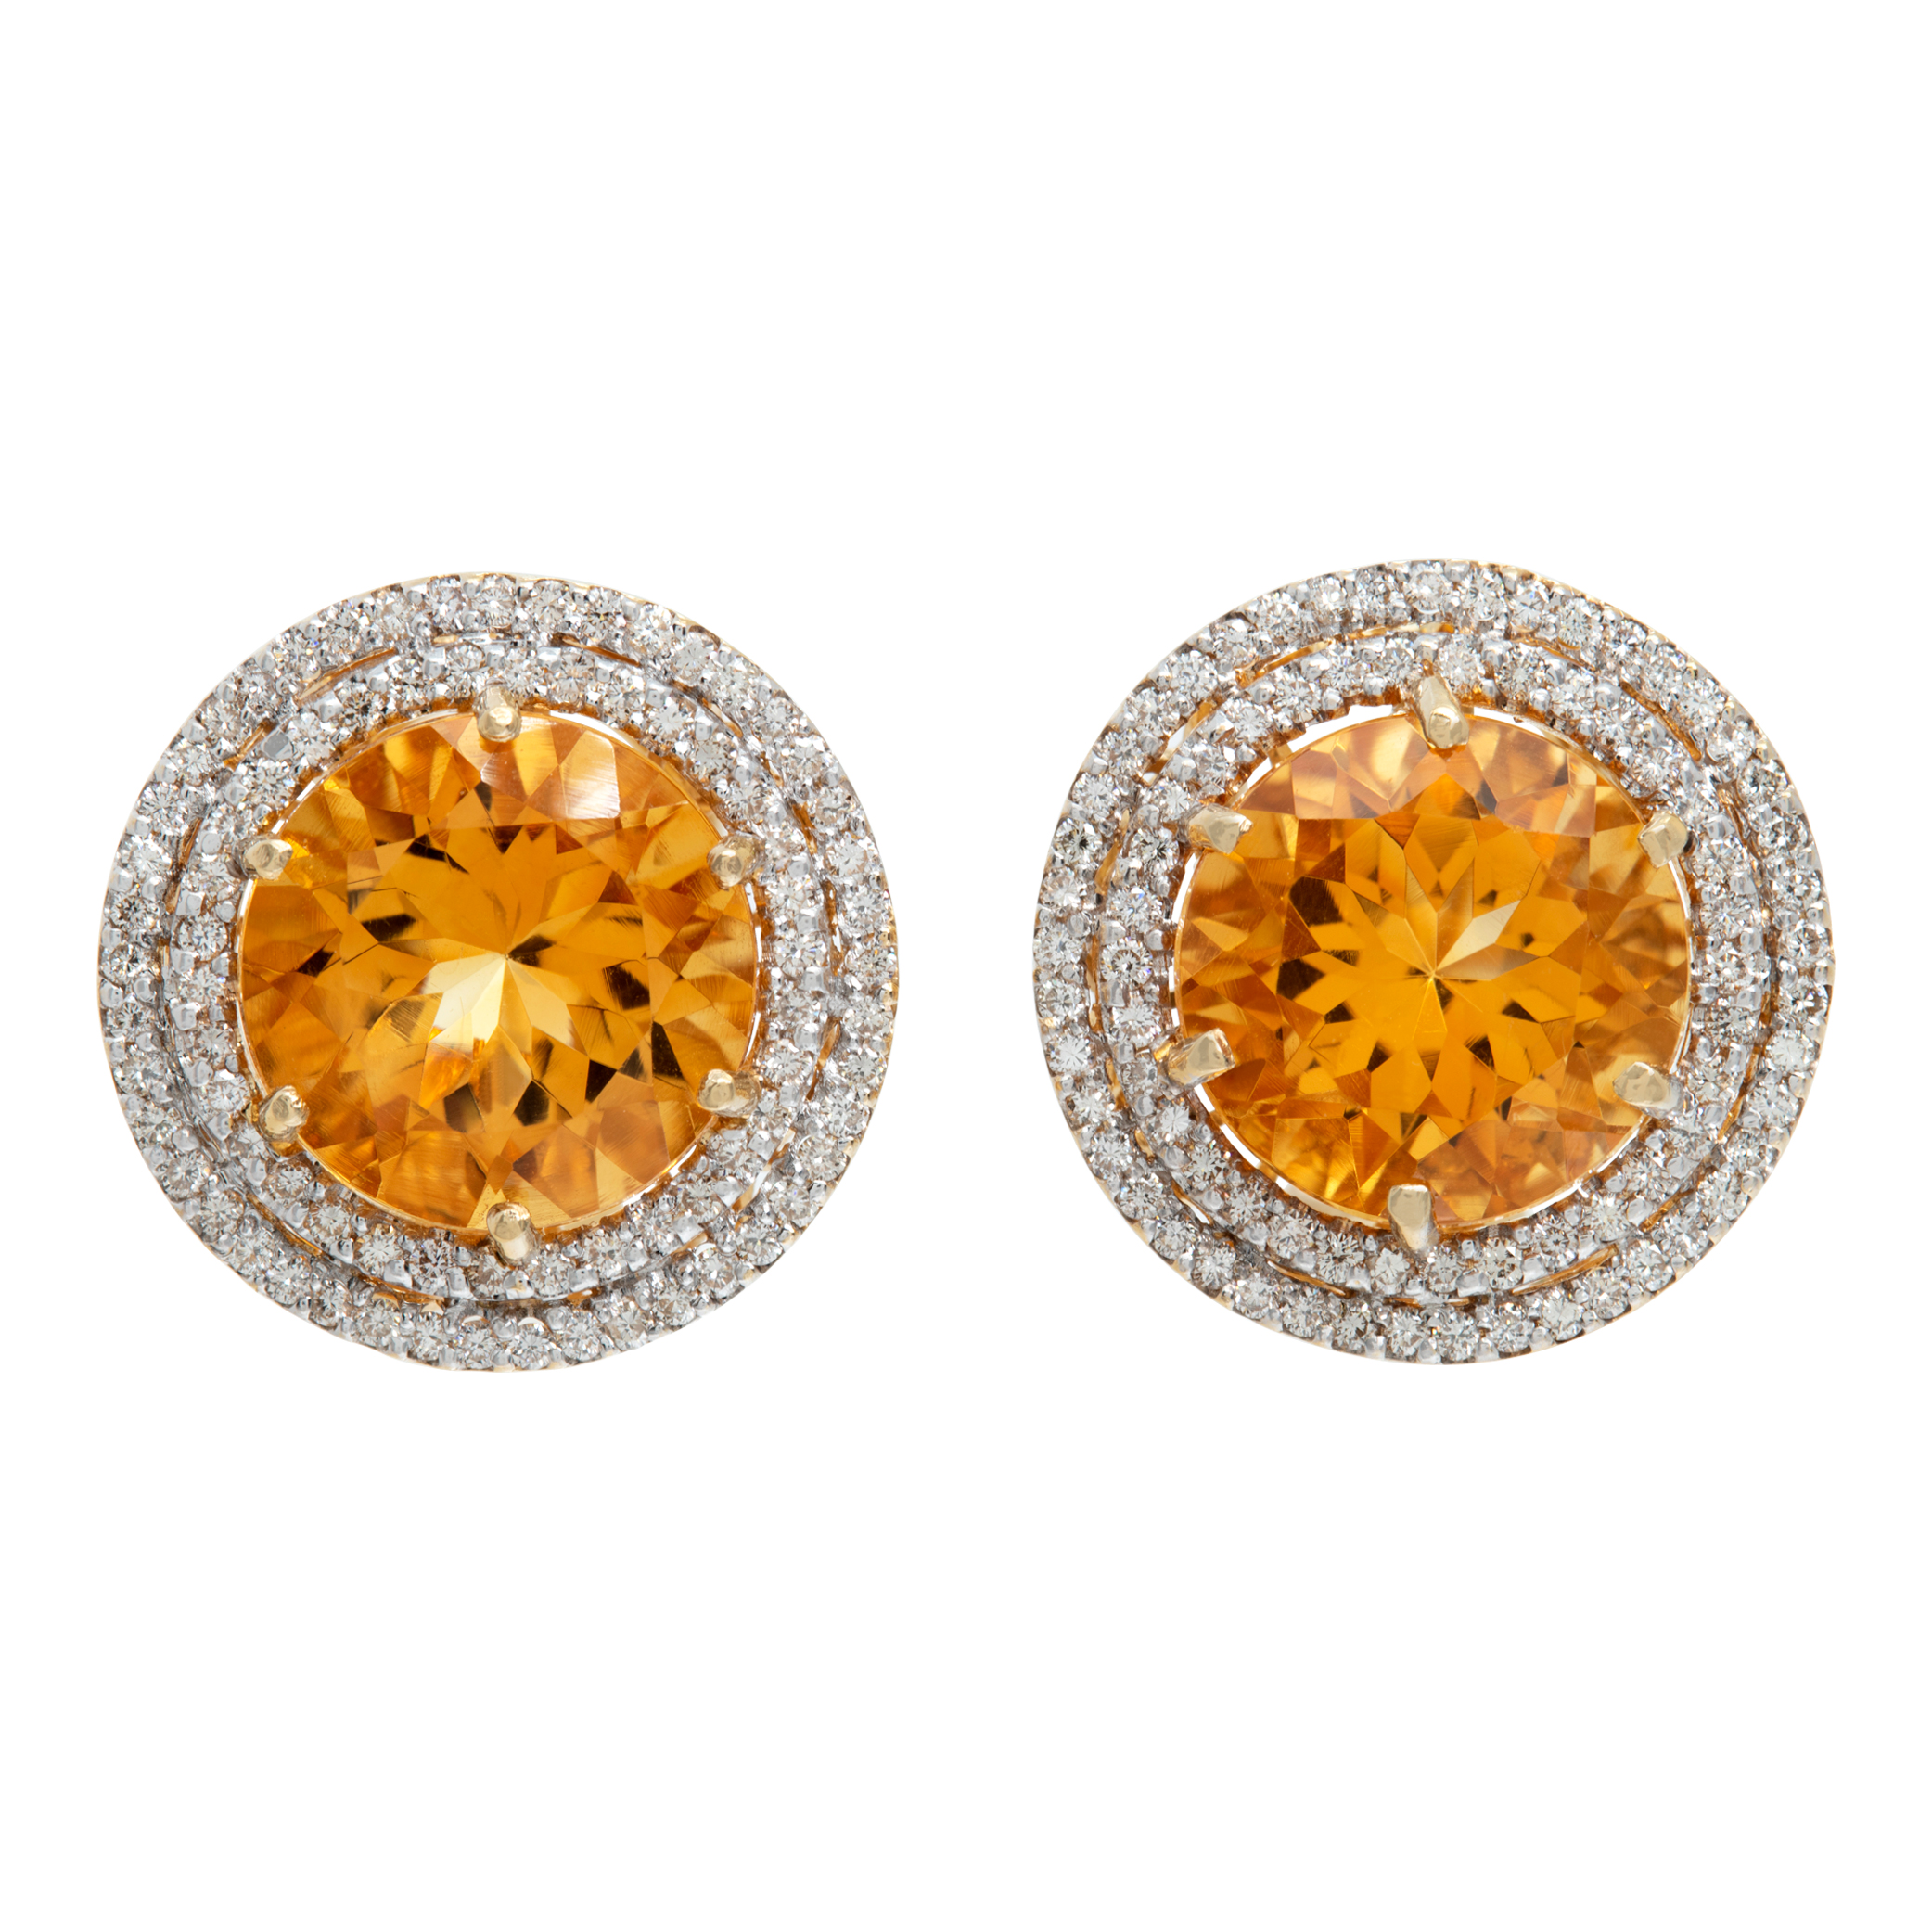 Citrine earrings with diamond accents in 18k yellow gold (Stones)